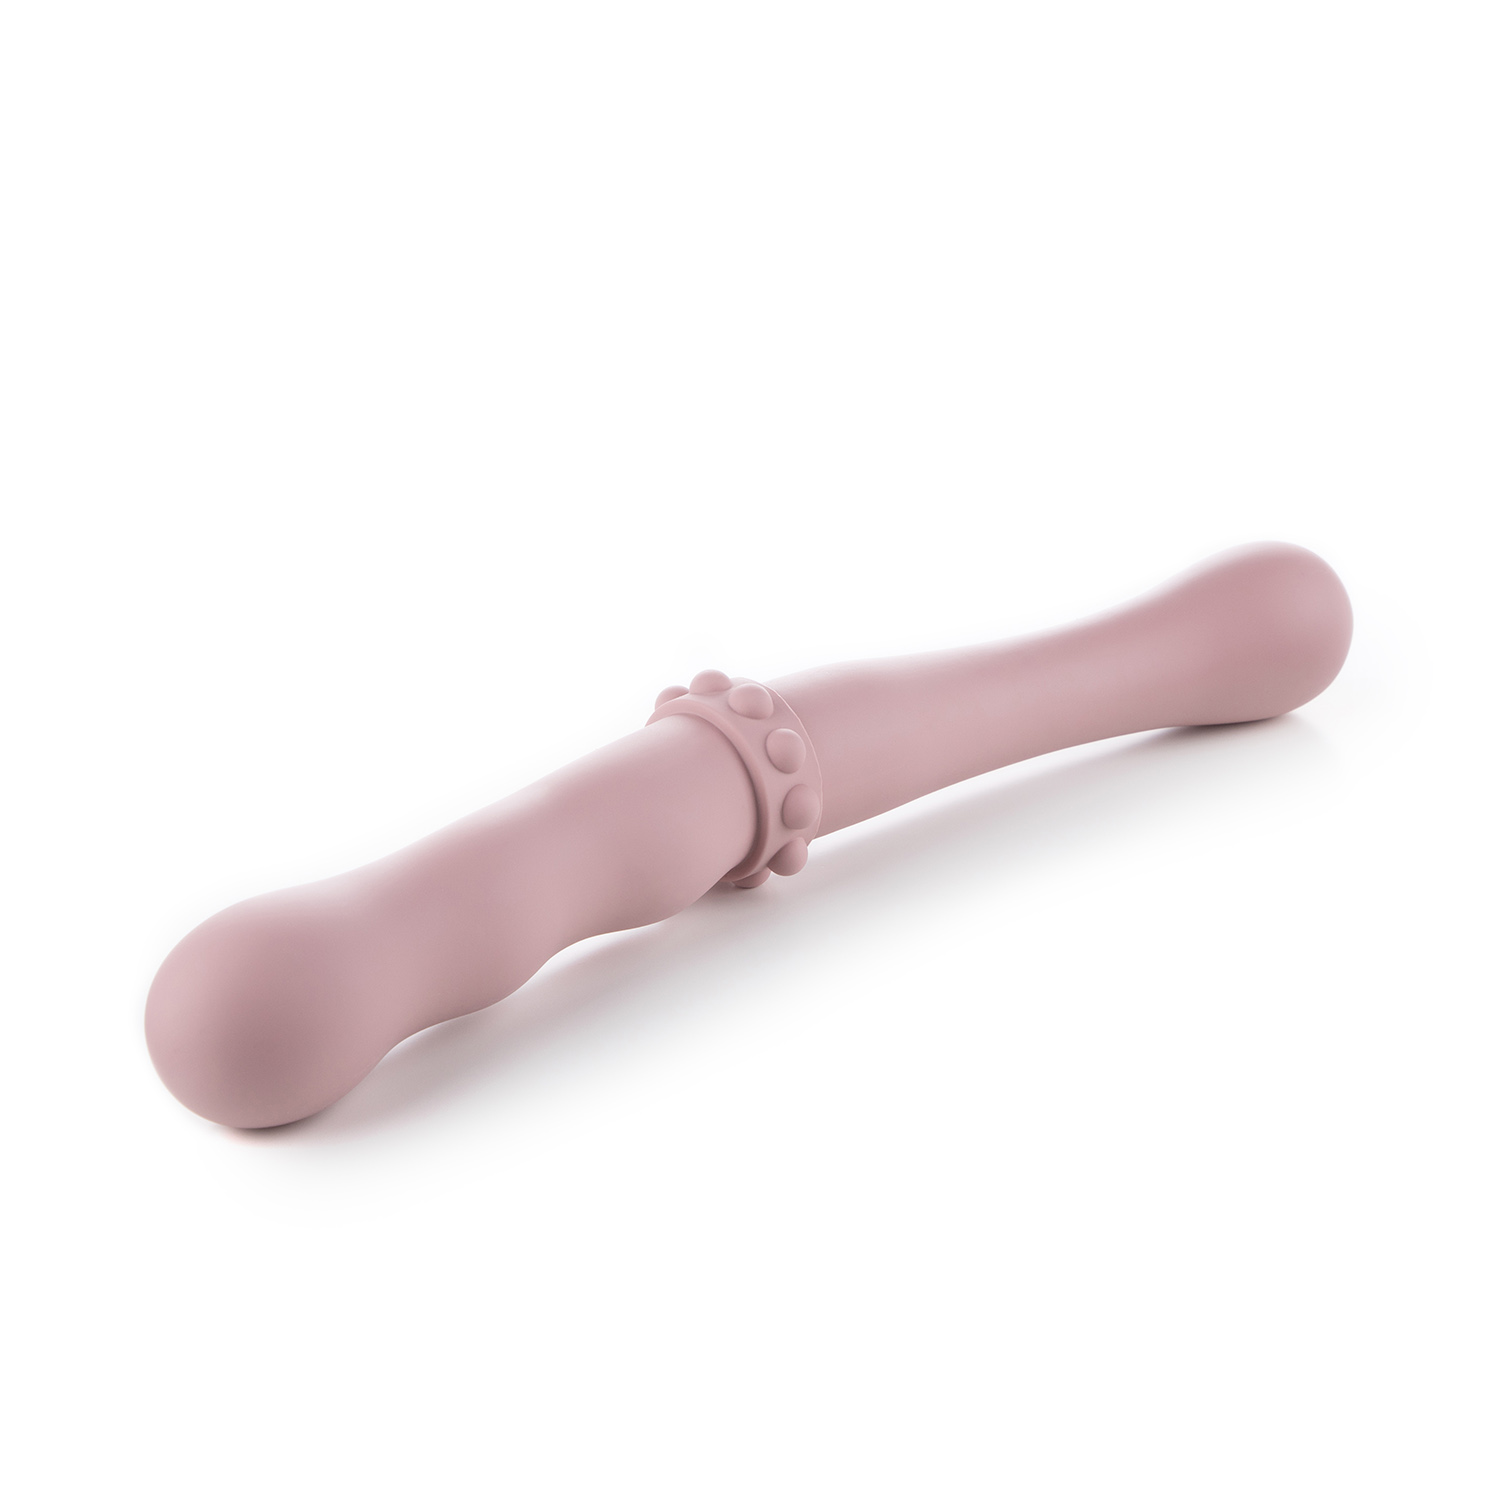 CLASSIC SMOOTH DOUBLE ENDED DILDO INTIMACY IN PINK